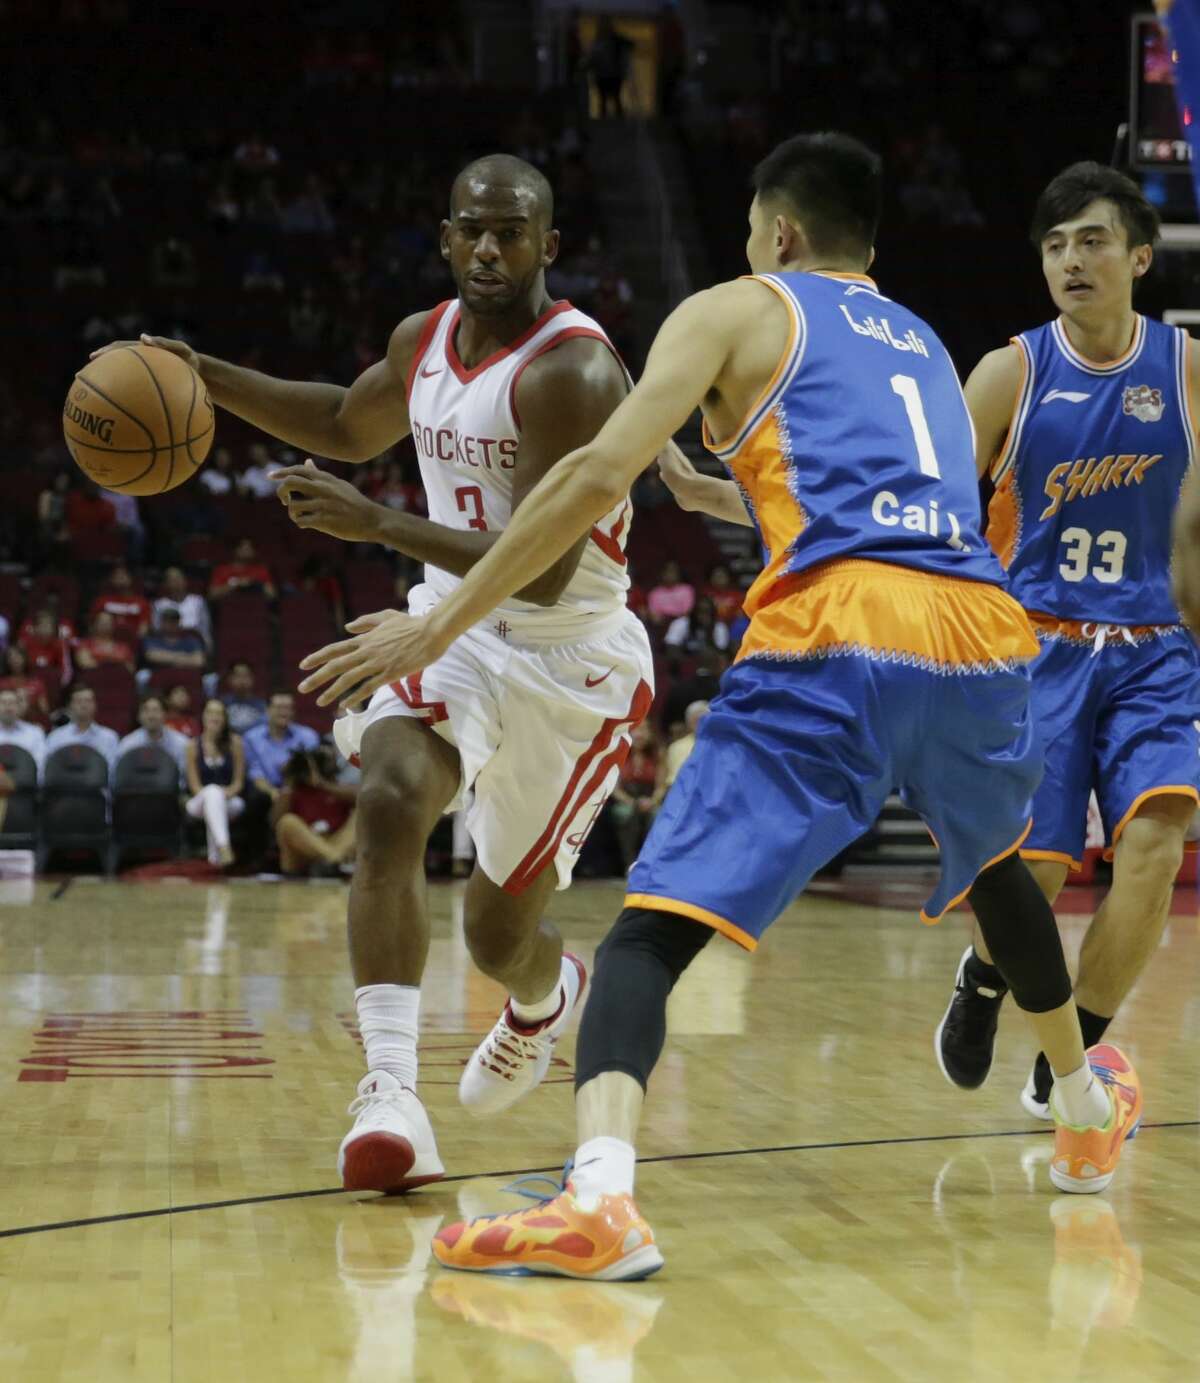 HOUSTON, TX - OCTOBER 05: Chris Paul #3 of Houston Rockets drives the ball in the first quarter defended by Cai Liang #1 of Shanghai Sharks at Toyota Center on October 5, 2017 in Houston, Texas. NOTE TO USER: User expressly acknowledges and agrees that, by downloading and or using this Photograph, user is consenting to the terms and conditions of the Getty Images License Agreement. (Photo by Tim Warner/Getty Images)